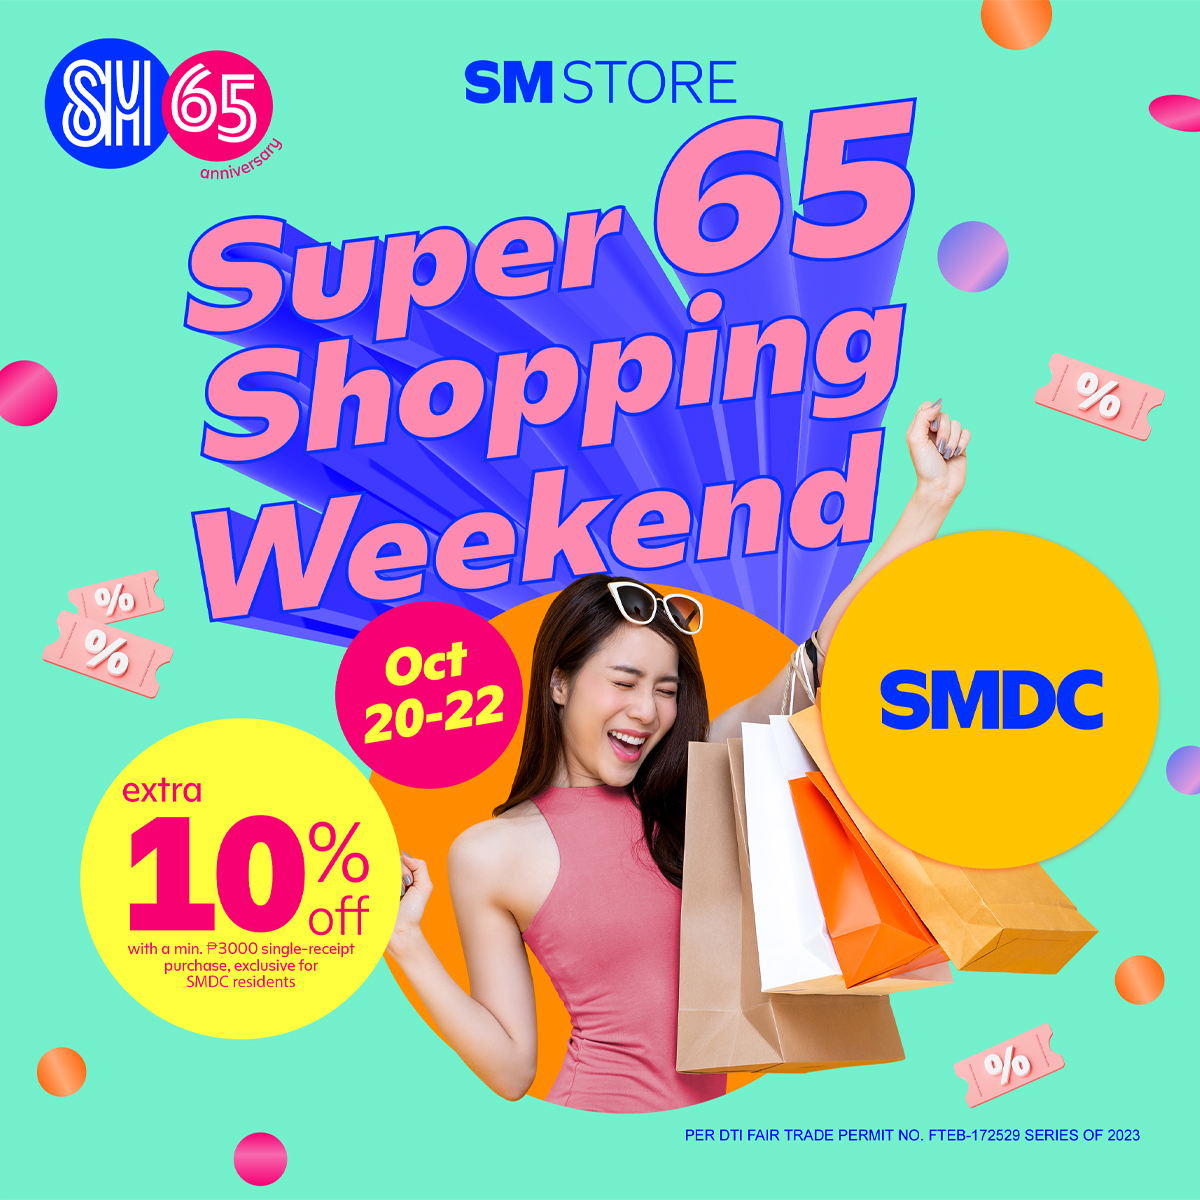 Chain--Shopping-Weekend--smdc